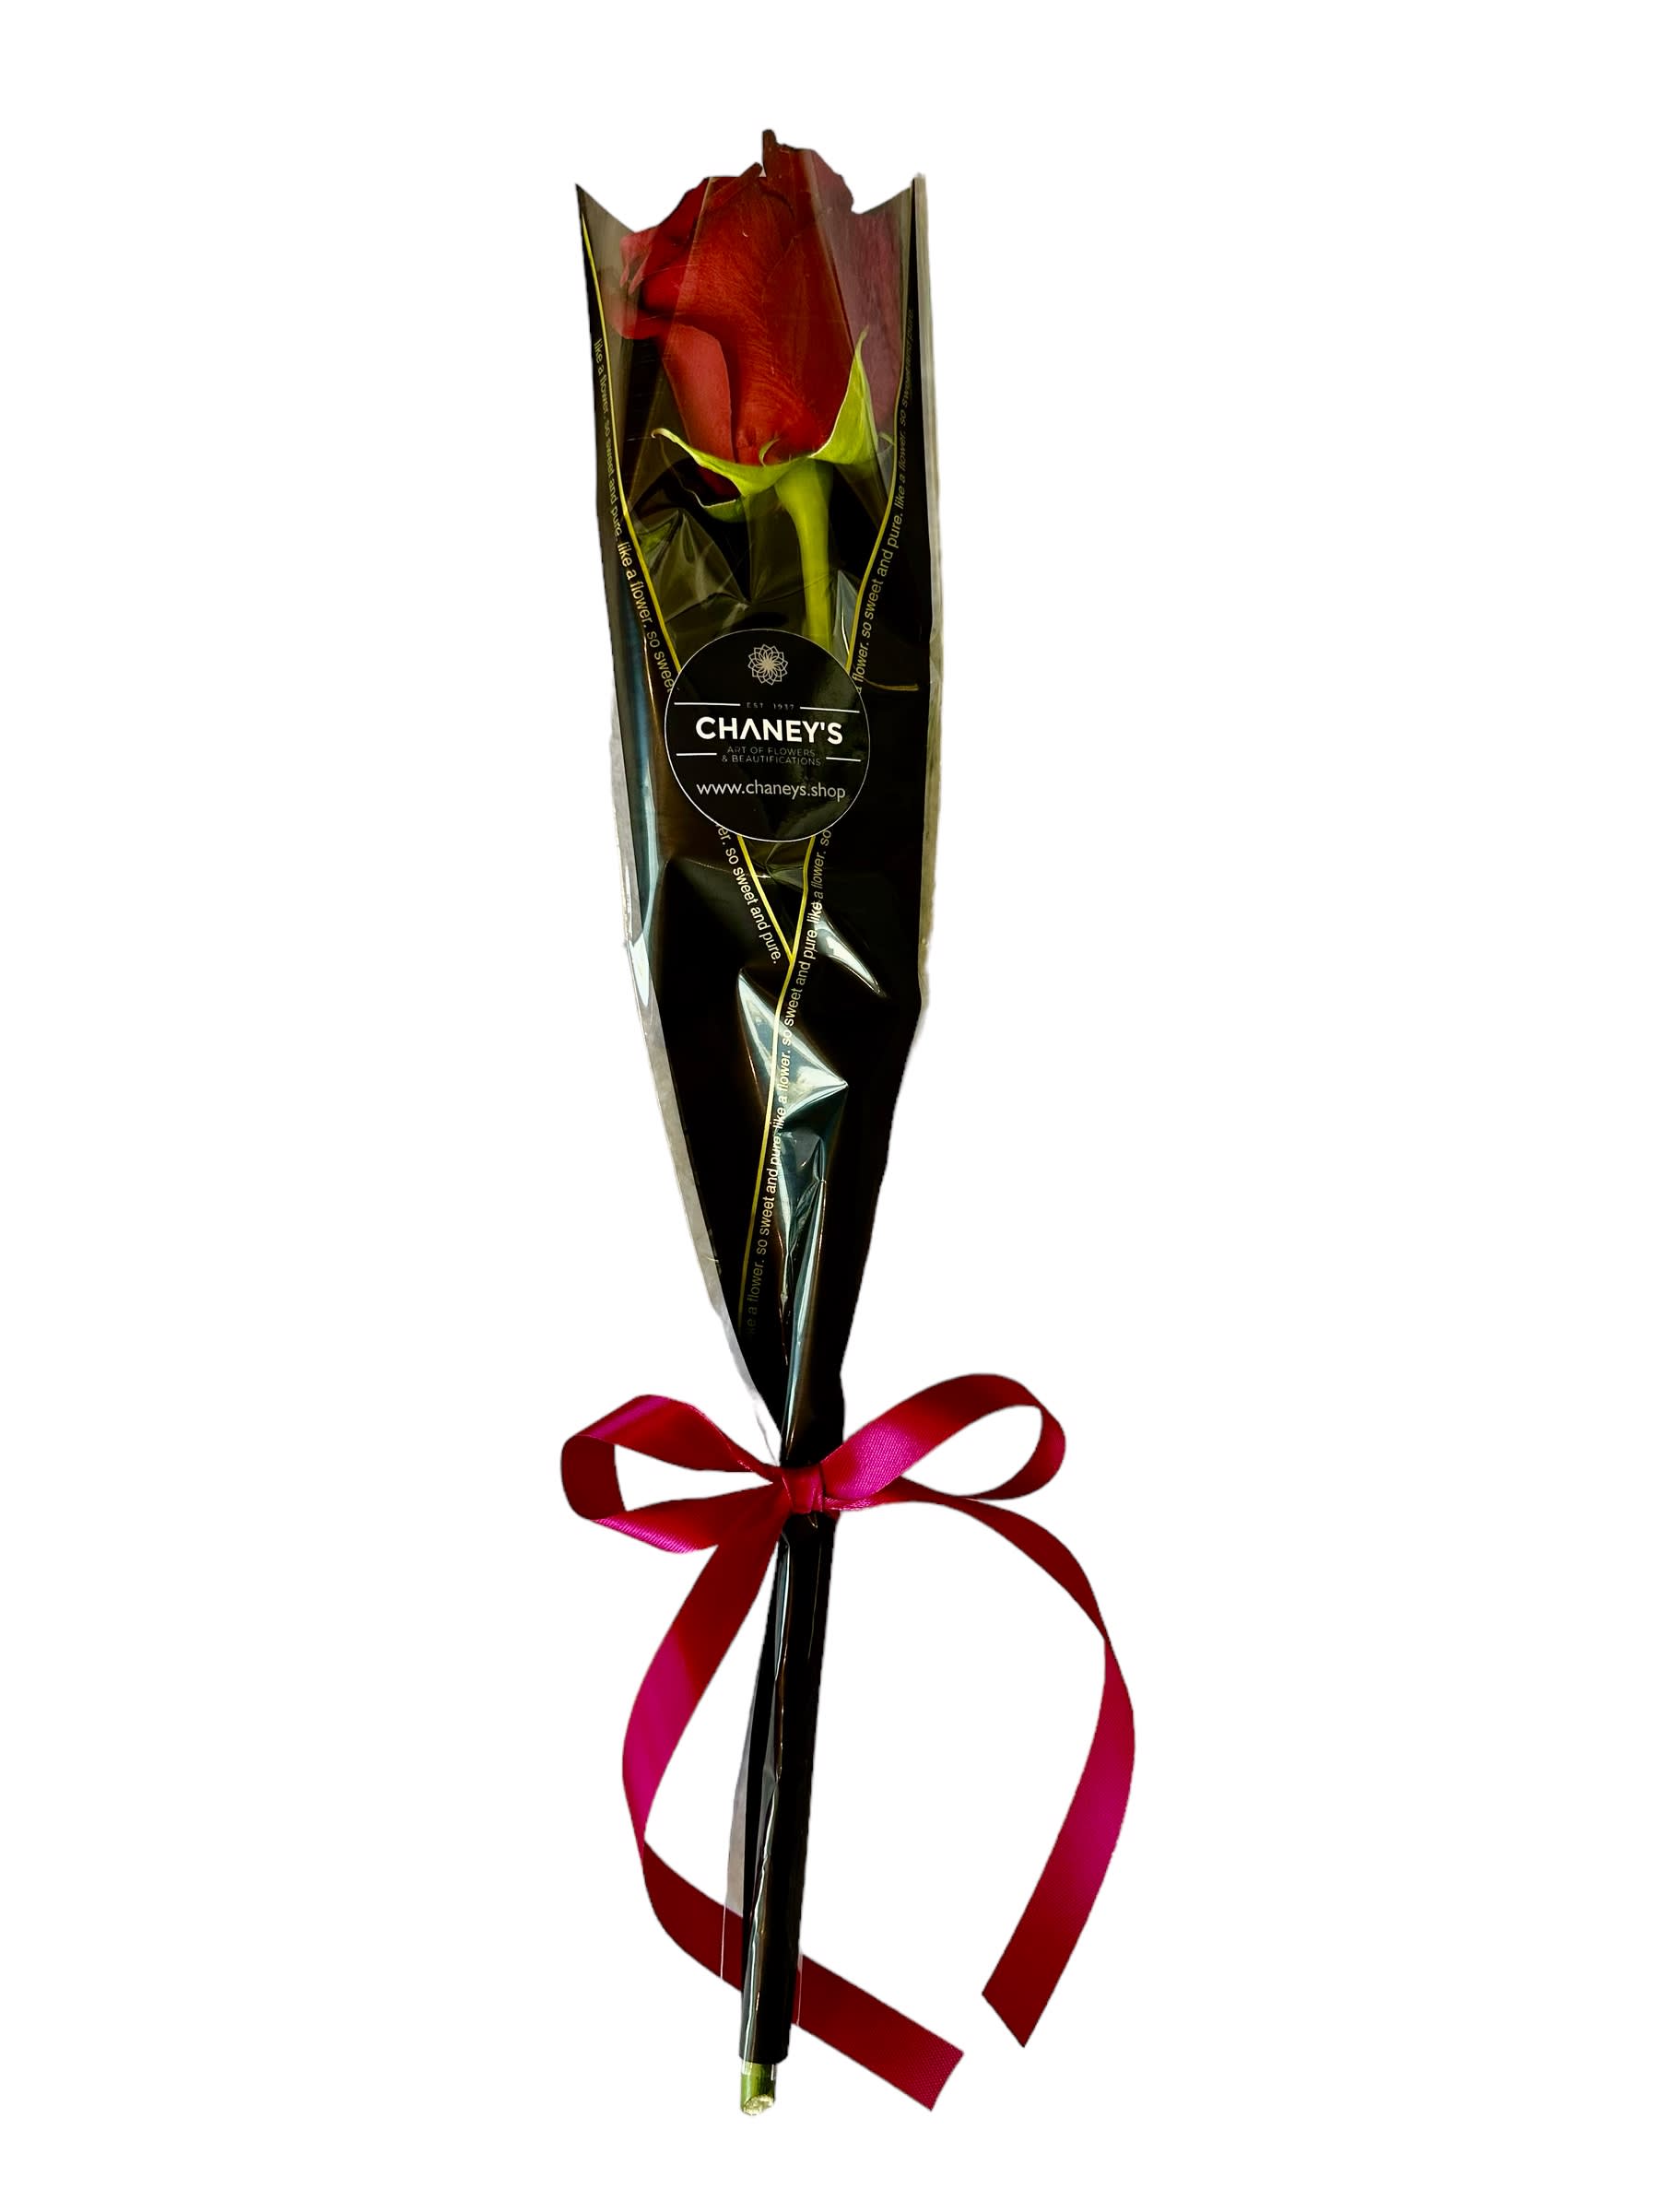 Chaney´s Single Red Rose - 1 beautiful fresh cut long stem rose wrapped with a ribbon. The perfect gift for any occasion!